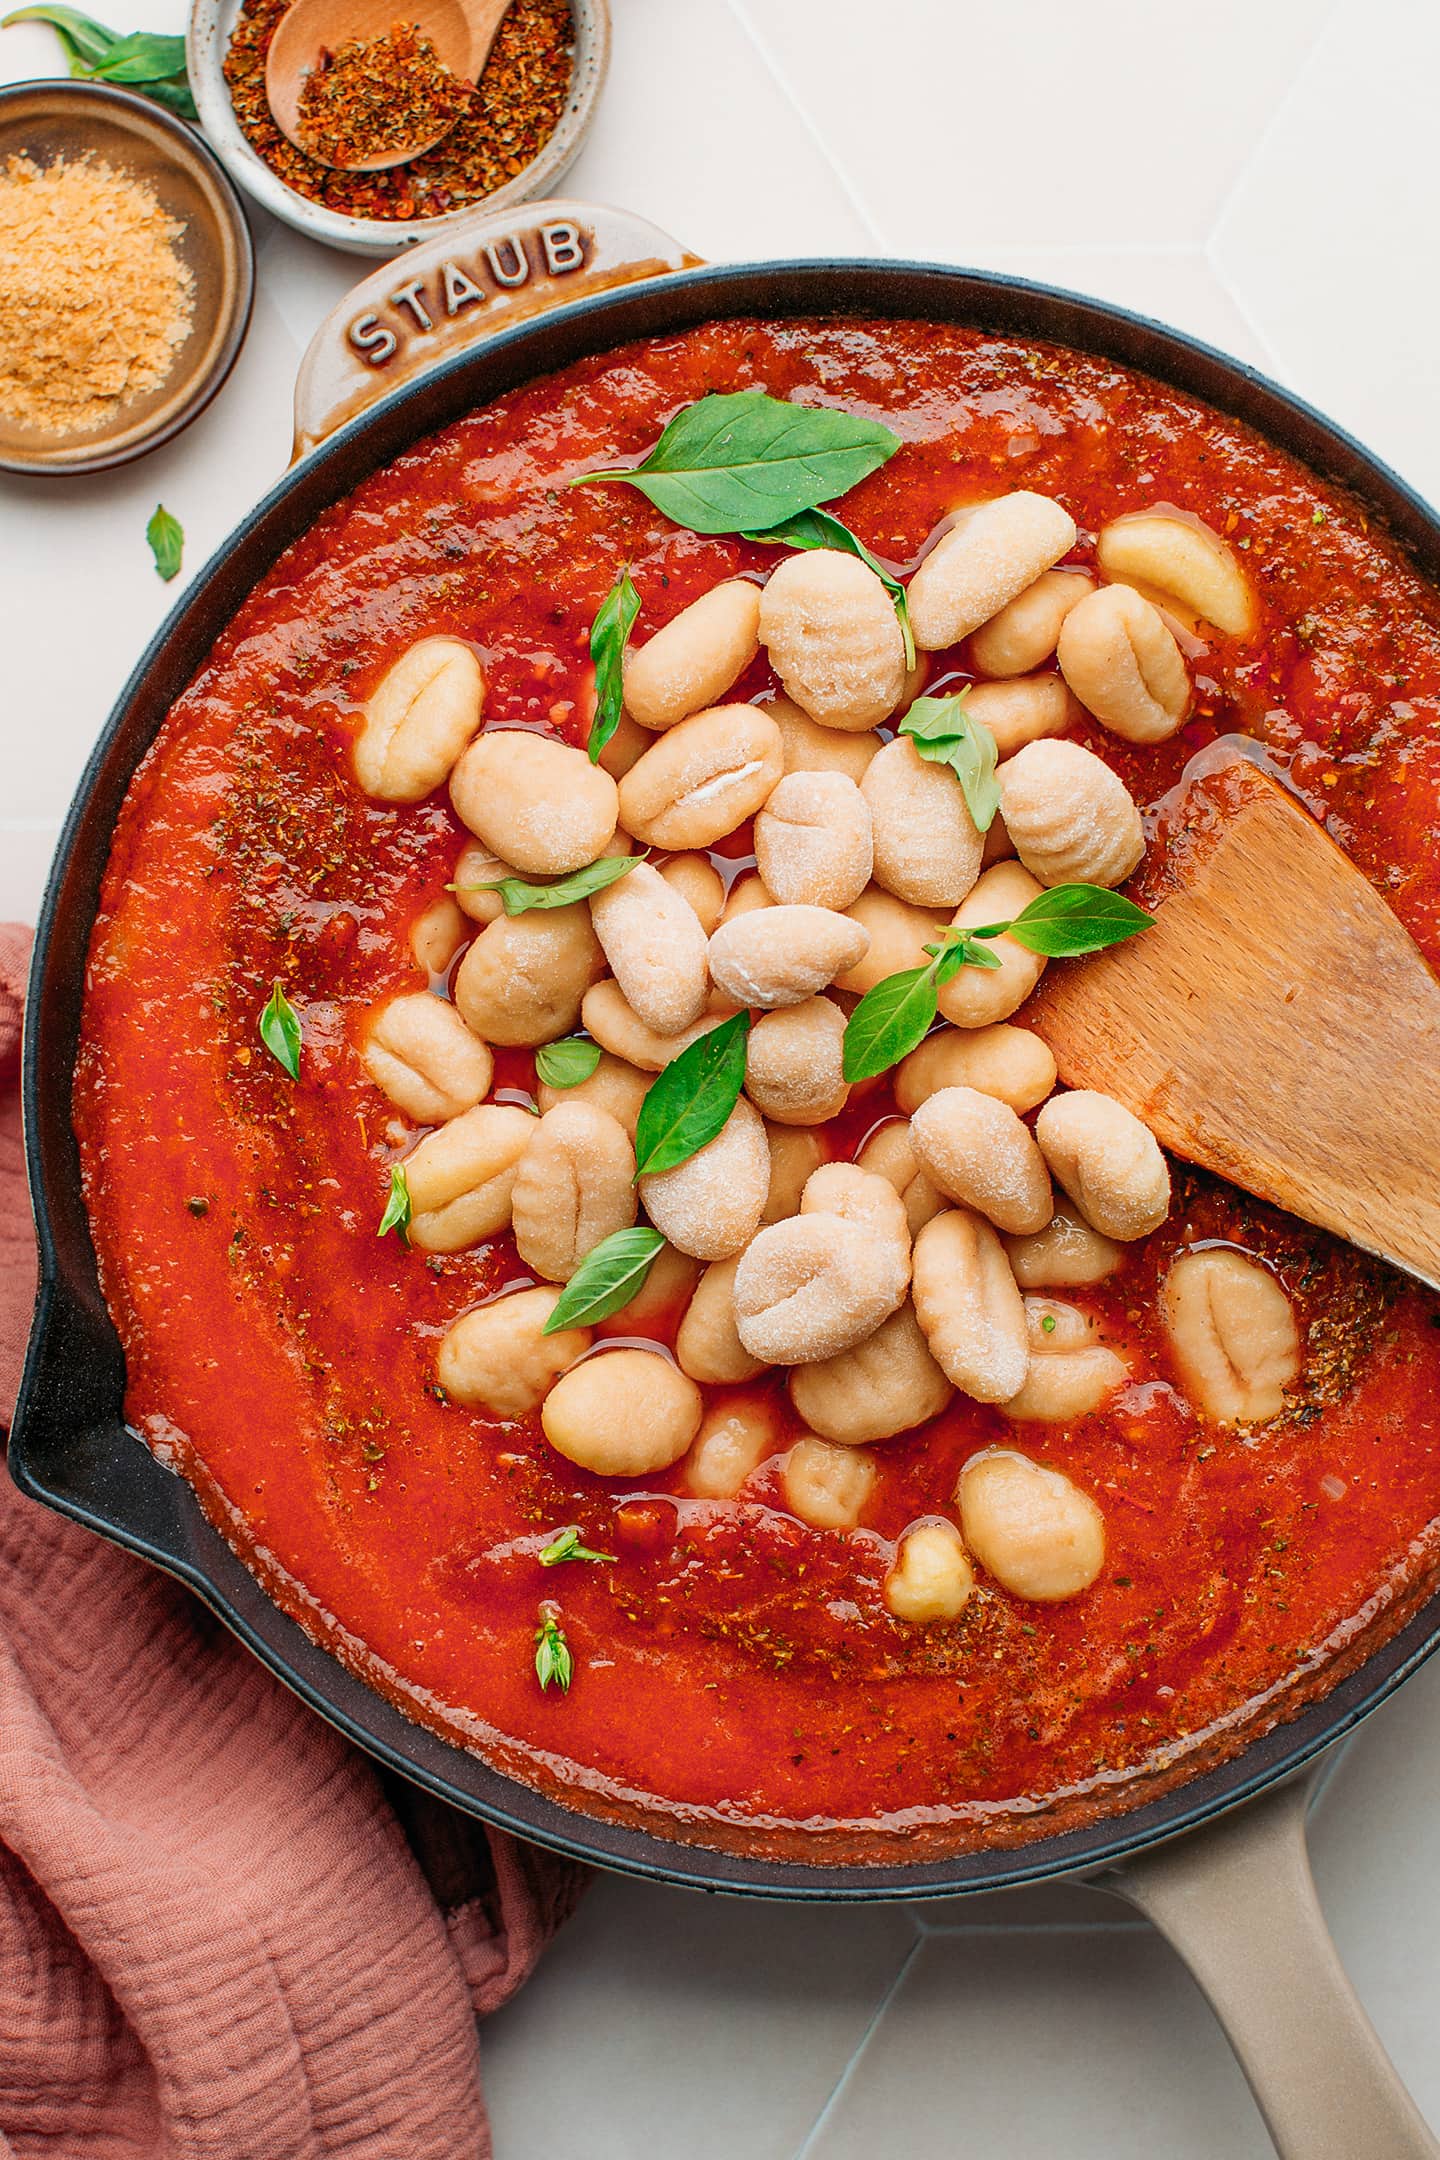 Gnocchi and tomato sauce in a skillet.